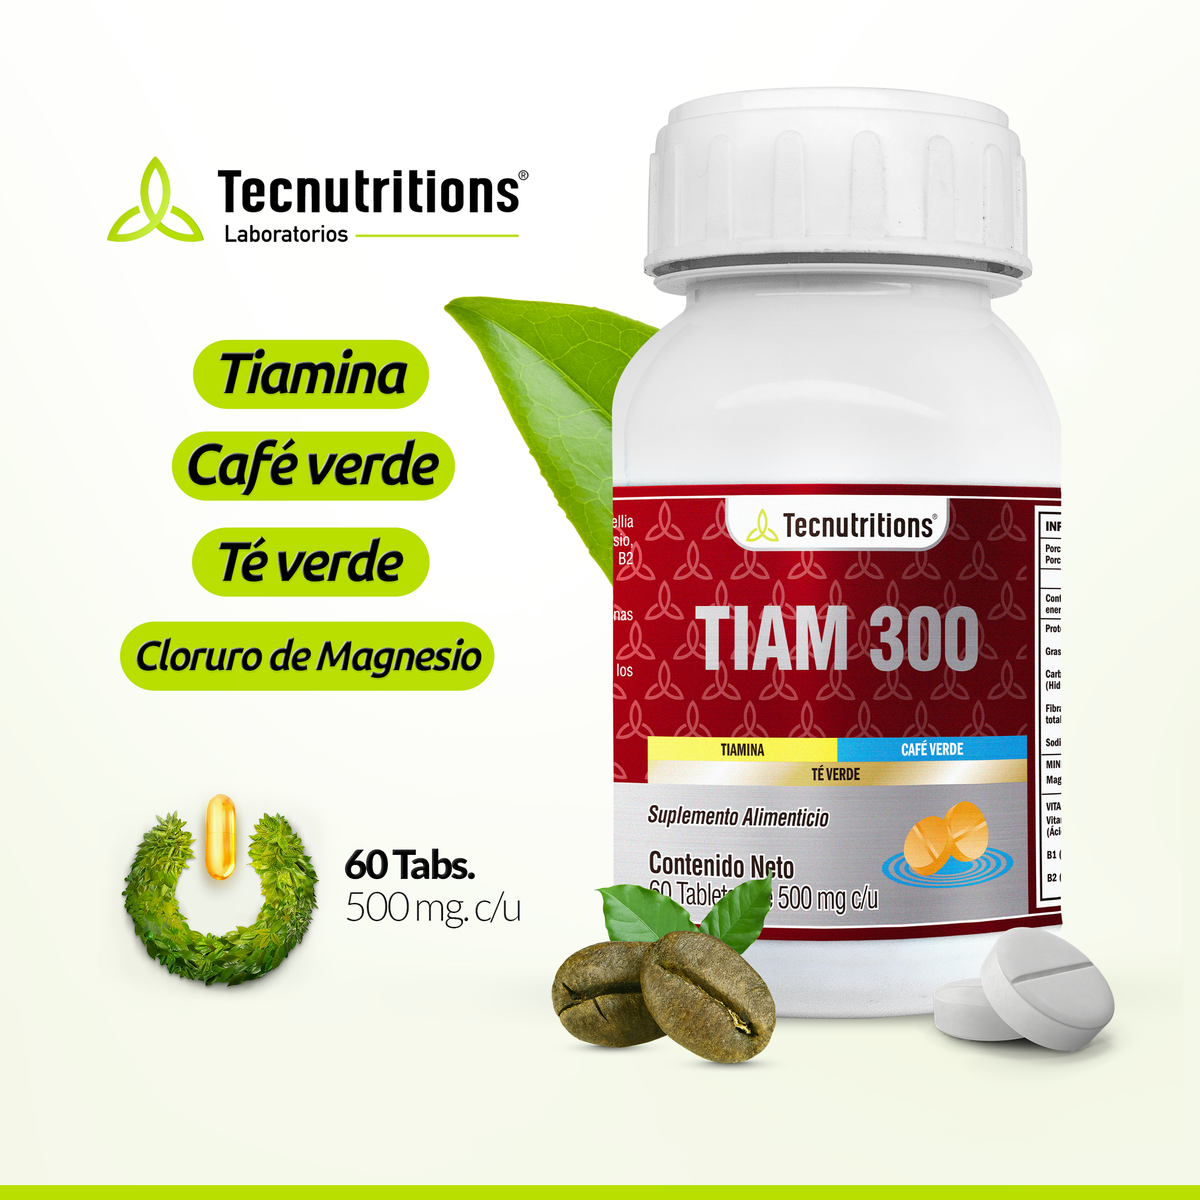 Food supplement with vitamins, minerals and antioxidants, Tiam 300, 60 tabl